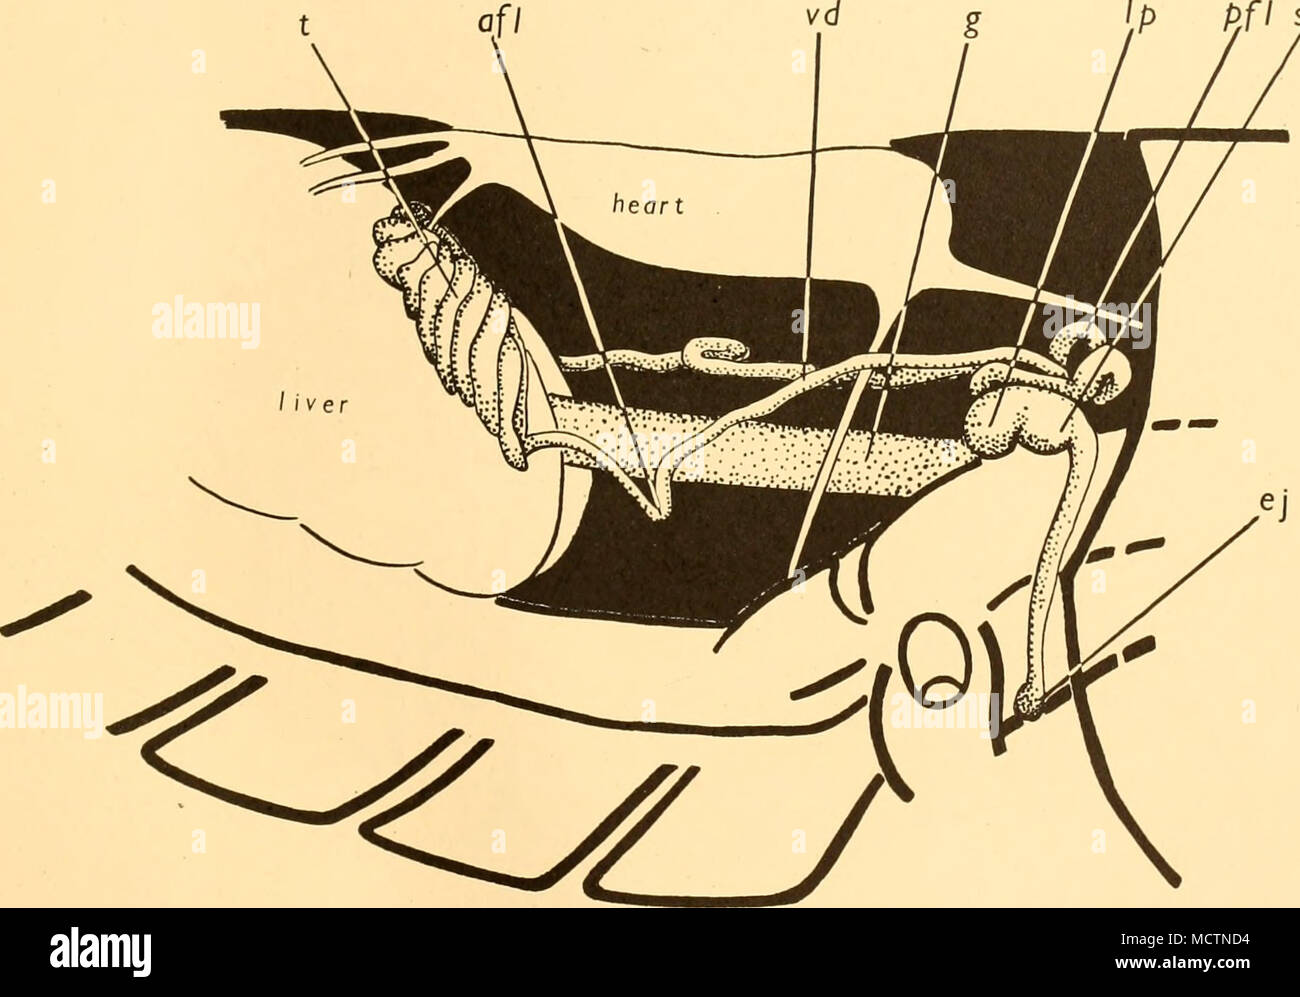 . Fig. 5. Dissection to show the development of the male reproductive system, x 15. afl, anterior flexure; ej, ejaculatory duct; g, gut; Ip, lateral pocket; pfl, posterior flexure; /, testis; sps, spermatophore sac; vd, vas deferens. This anterior flexure is bent first outwards and then inwards again. The vasa deferentia are also more swollen behind the external genital apertures. The follicles of the testis increase in size until they are closely crowded together, hiding the horseshoe-shaped band. Both the anterior and posterior flexures grow larger, the vasa deferentia begin to show coiling, Stock Photo